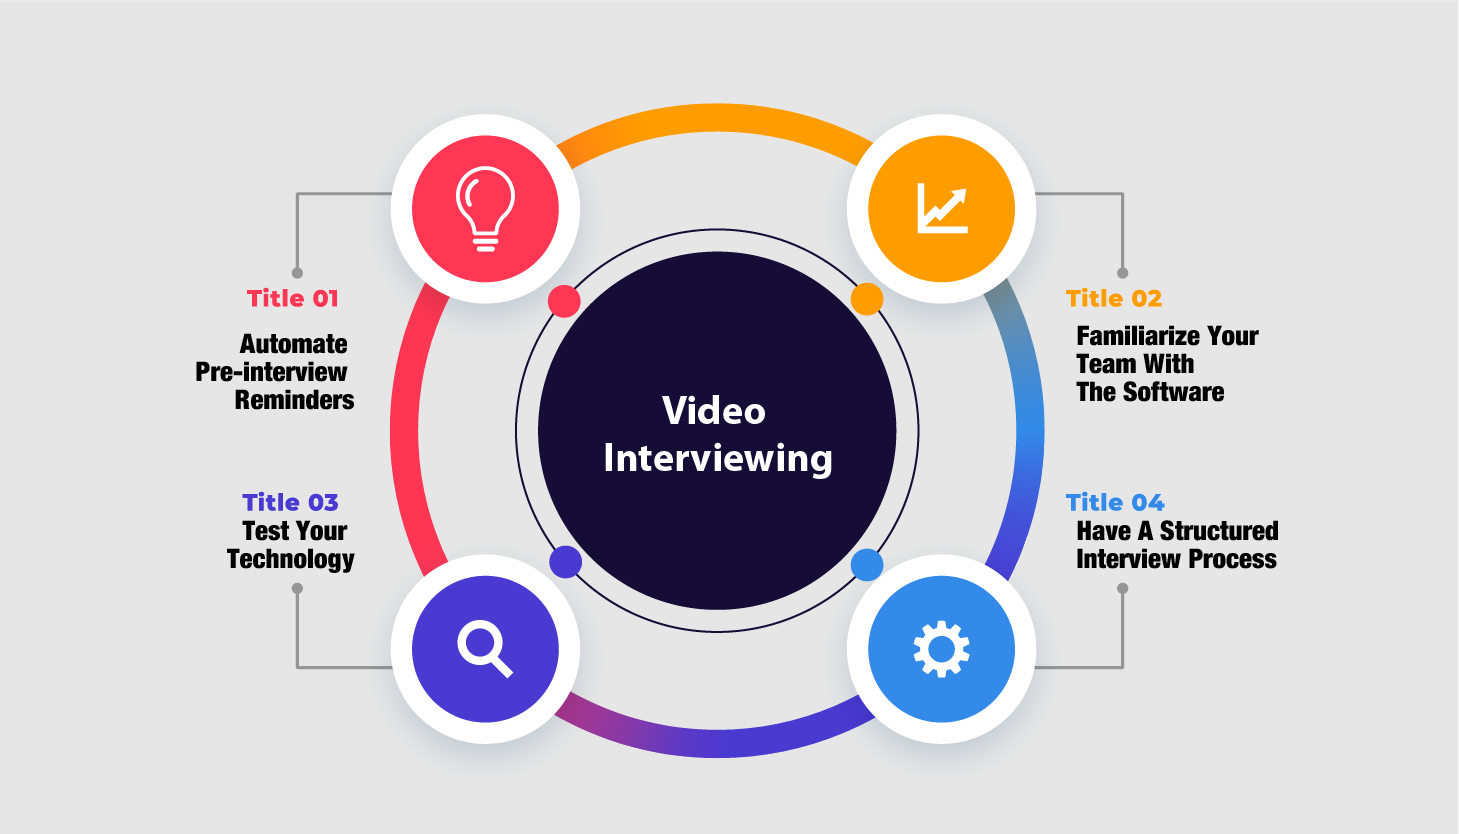 Video interviewing software effectively